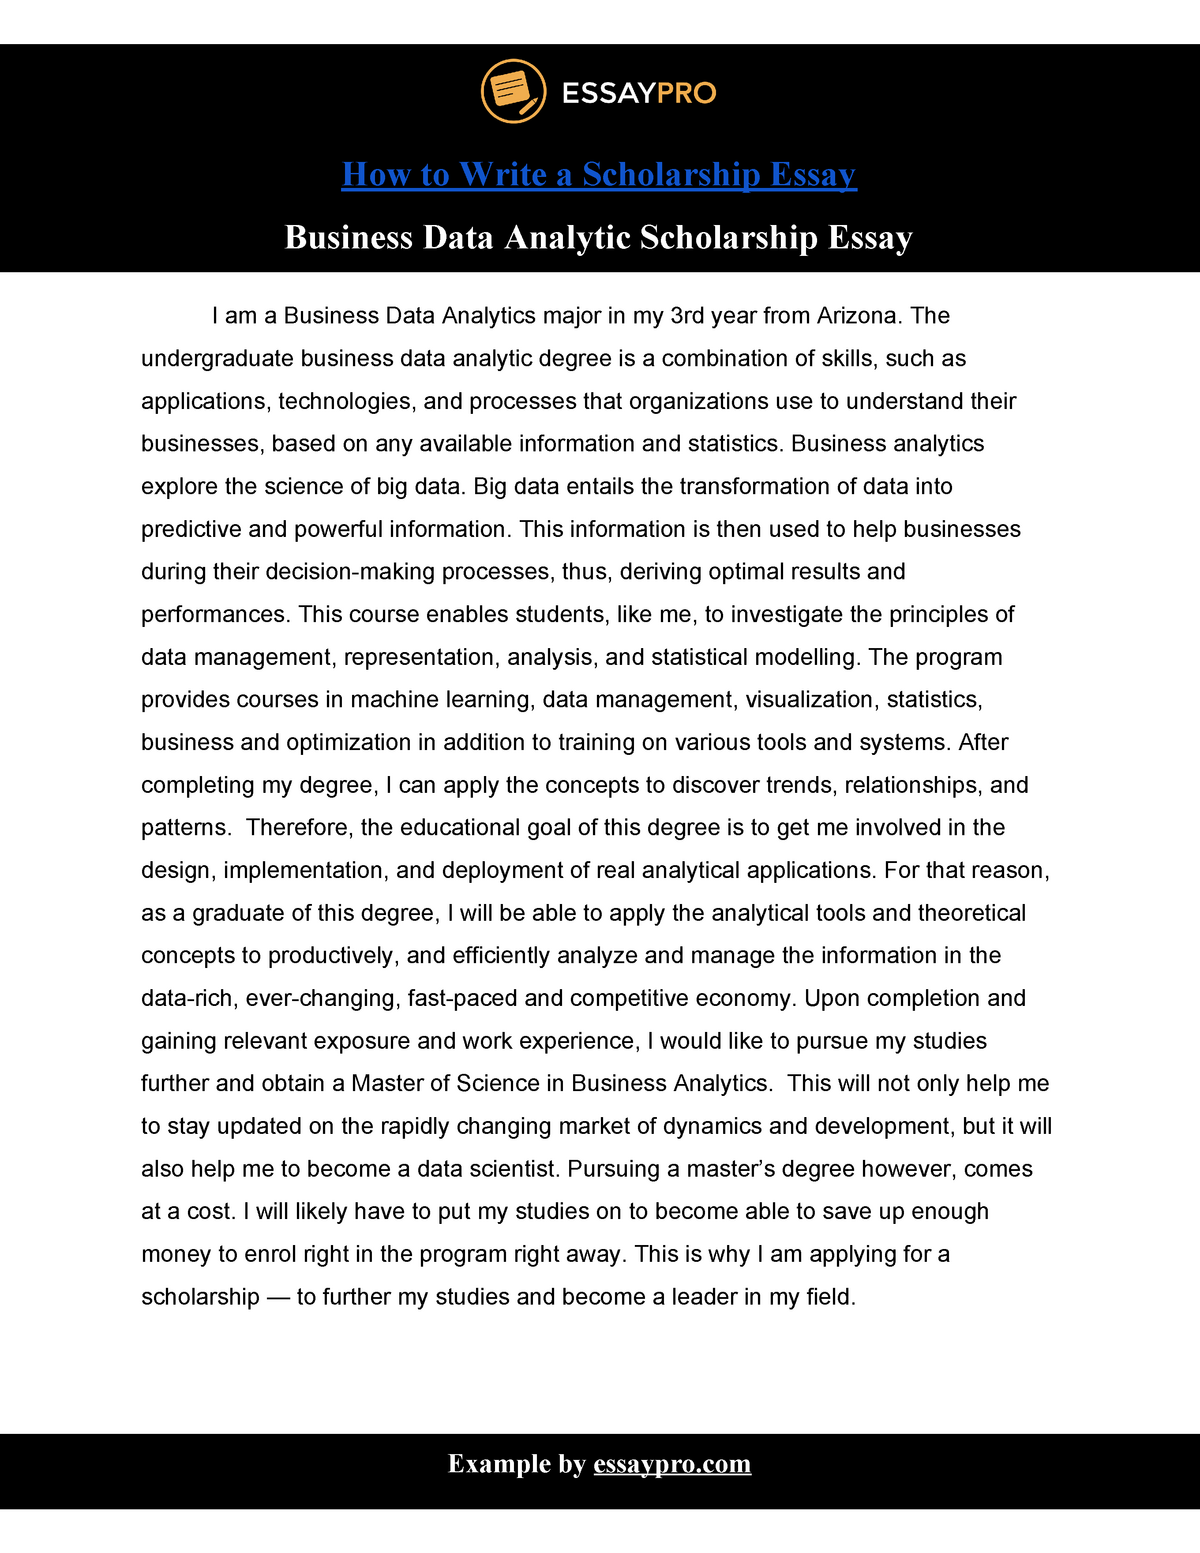 masters in business analytics essay